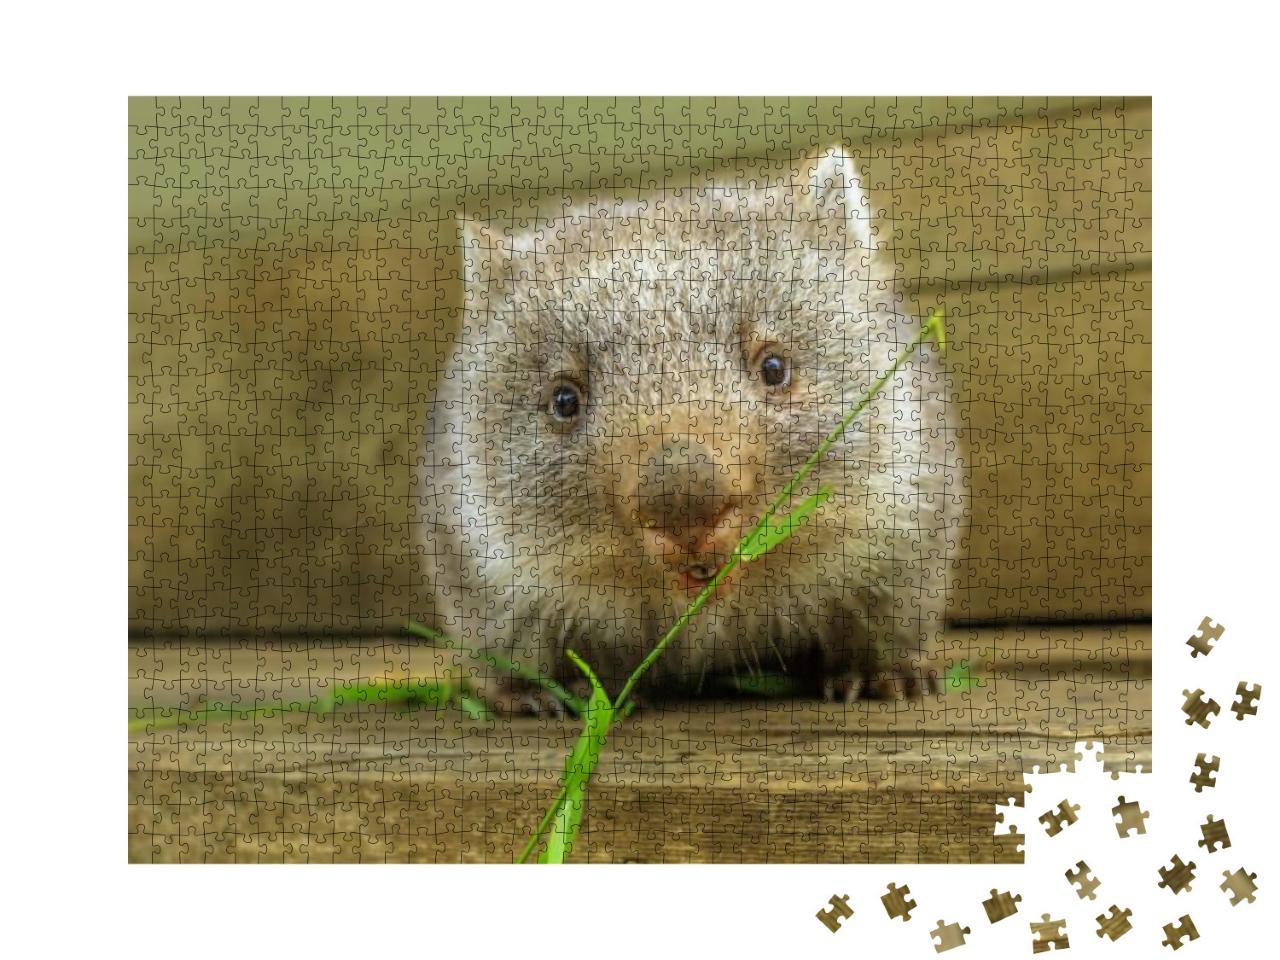 Interaction with a Cute Wombat Joey, Australian Herbivore... Jigsaw Puzzle with 1000 pieces